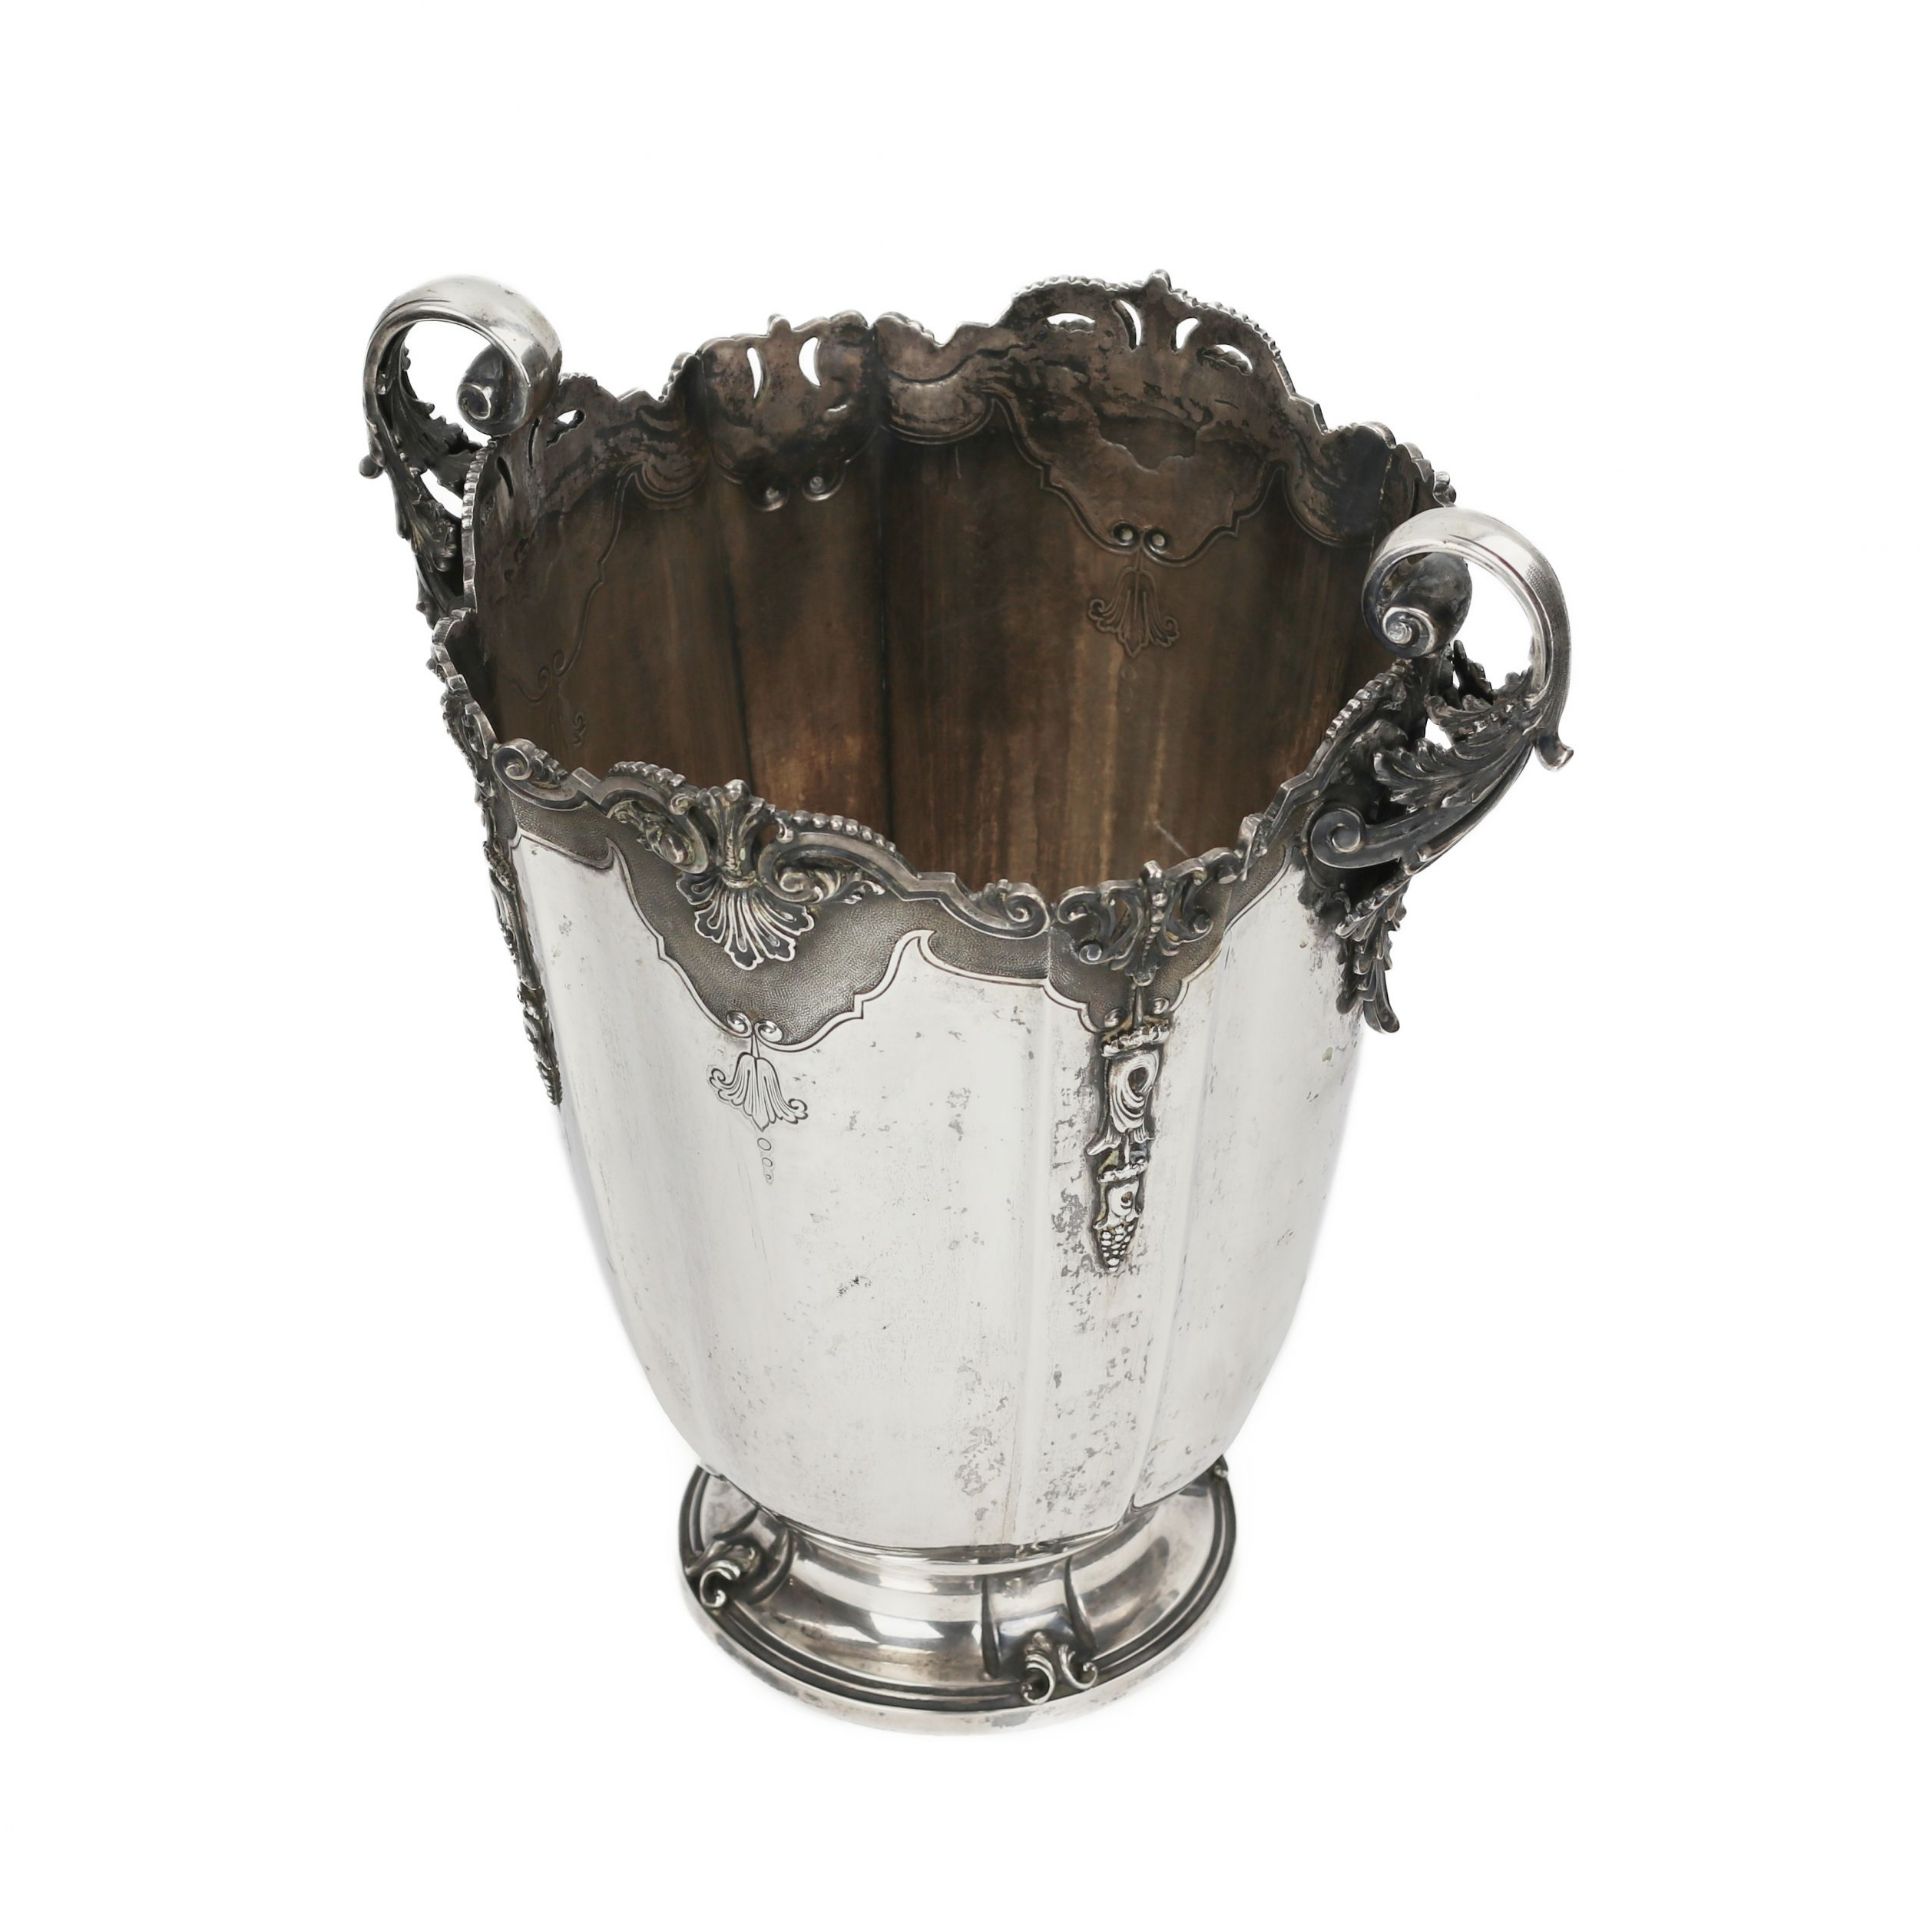 An ornate Italian silver cooler in the shape of a vase. 1934-1944 - Image 4 of 7